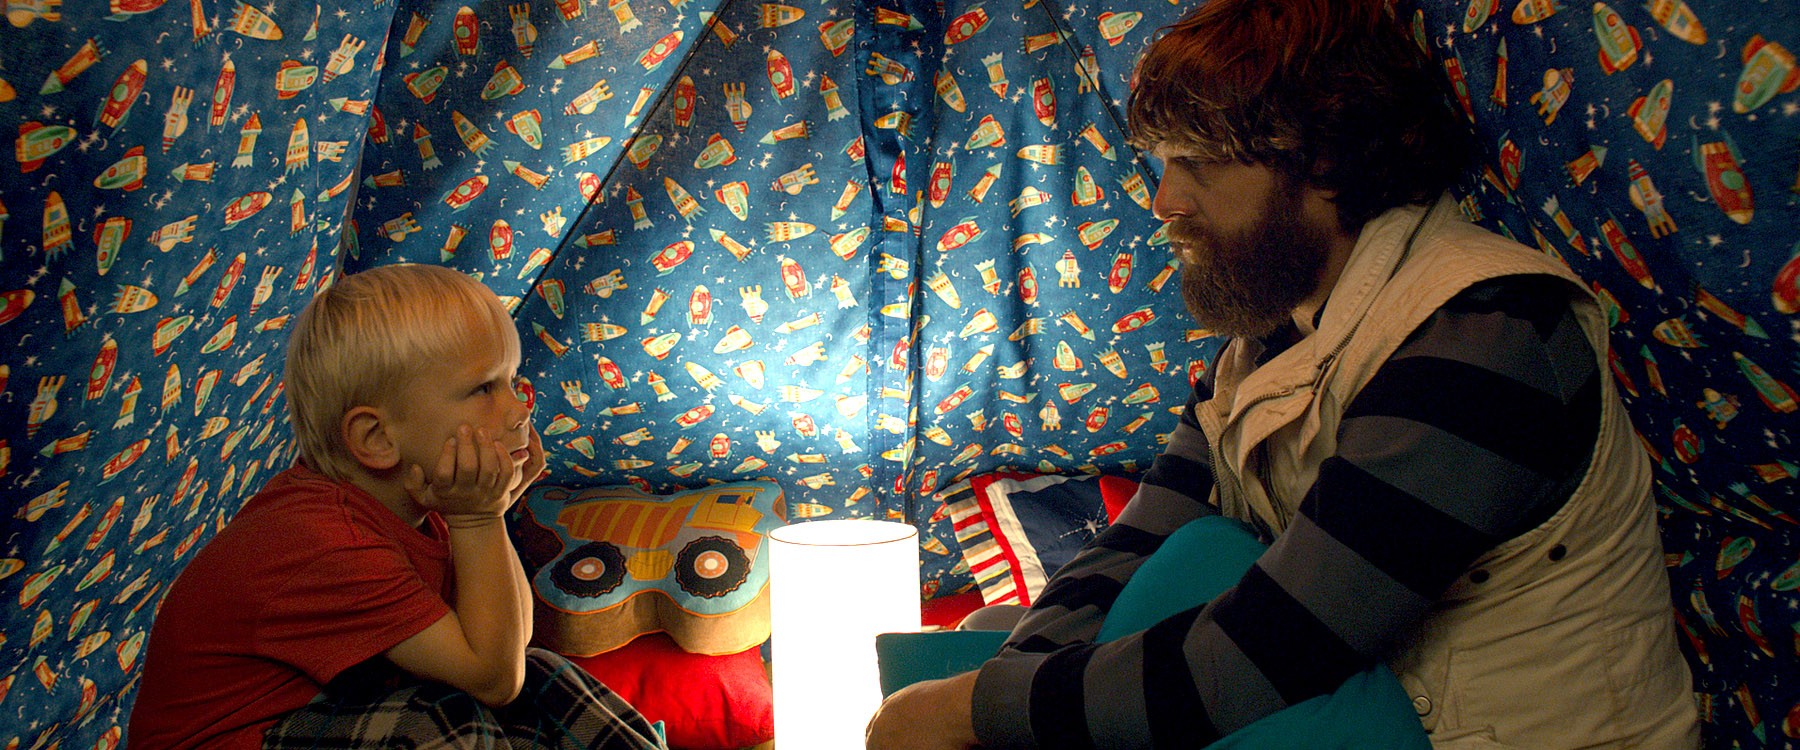 Grant Holmquist and Zach Galifianakis (stars as Alan) in Warner Bros. Pictures' The Hangover Part III (2013)